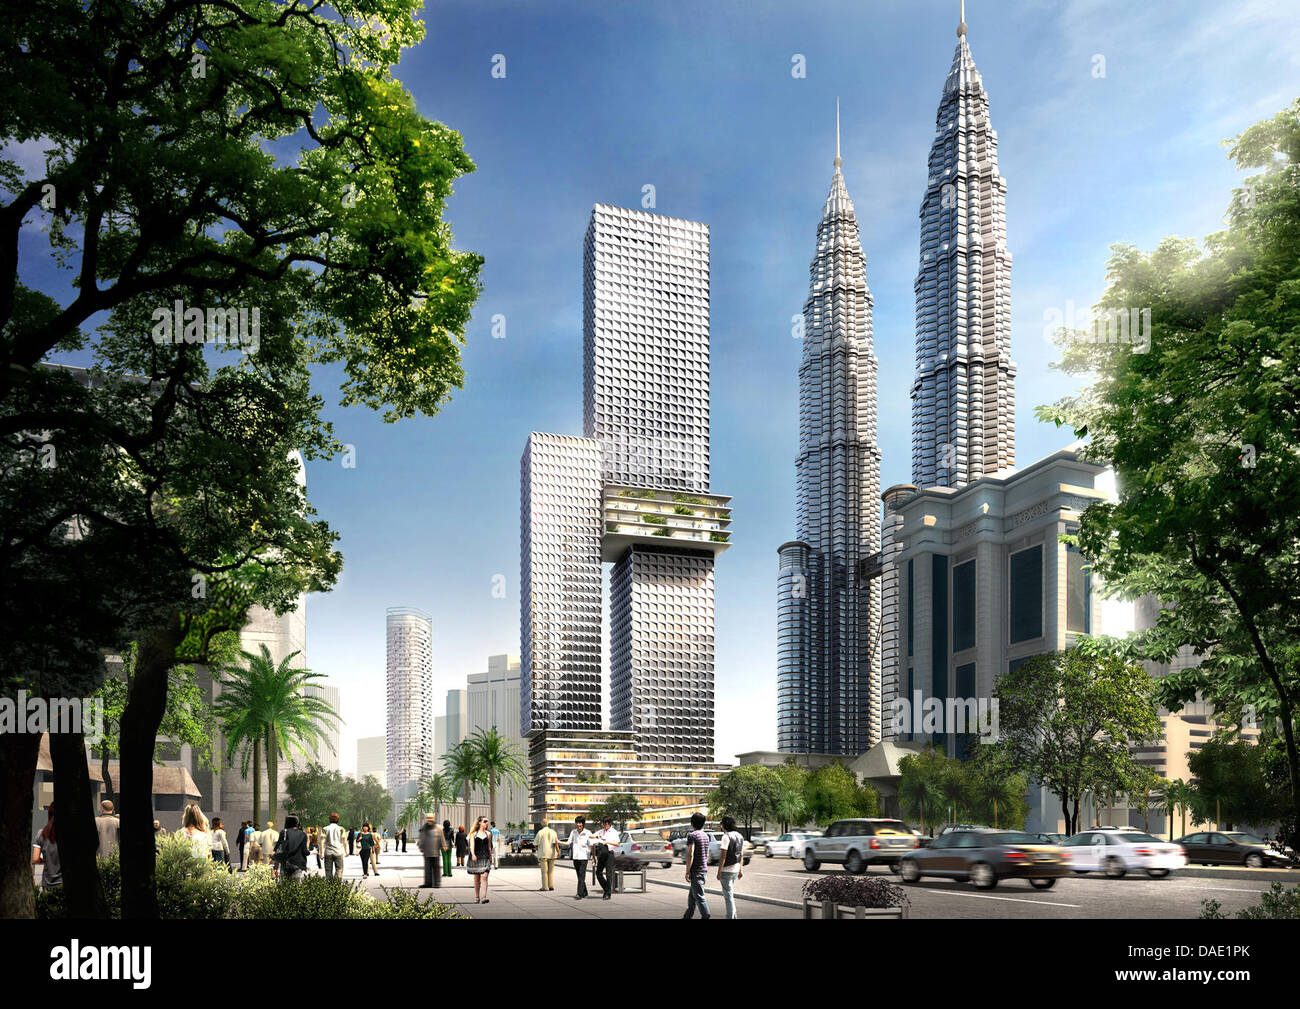 An undated computer simulation shows a draft of the Angkasa Raya highriser in Malaysia's capital Kuala Lumpur presented in Karlsruhe, Germany. Karlsruhe-based Ole Scheeren wants to use the 268-metre-high tower to make highriser more publically accessible. The 40-year-old presented the plans for his 5-block-building on 08 November 2011. Photo: Kevin Ou/Architekturbuero Ole Scheeren Stock Photo